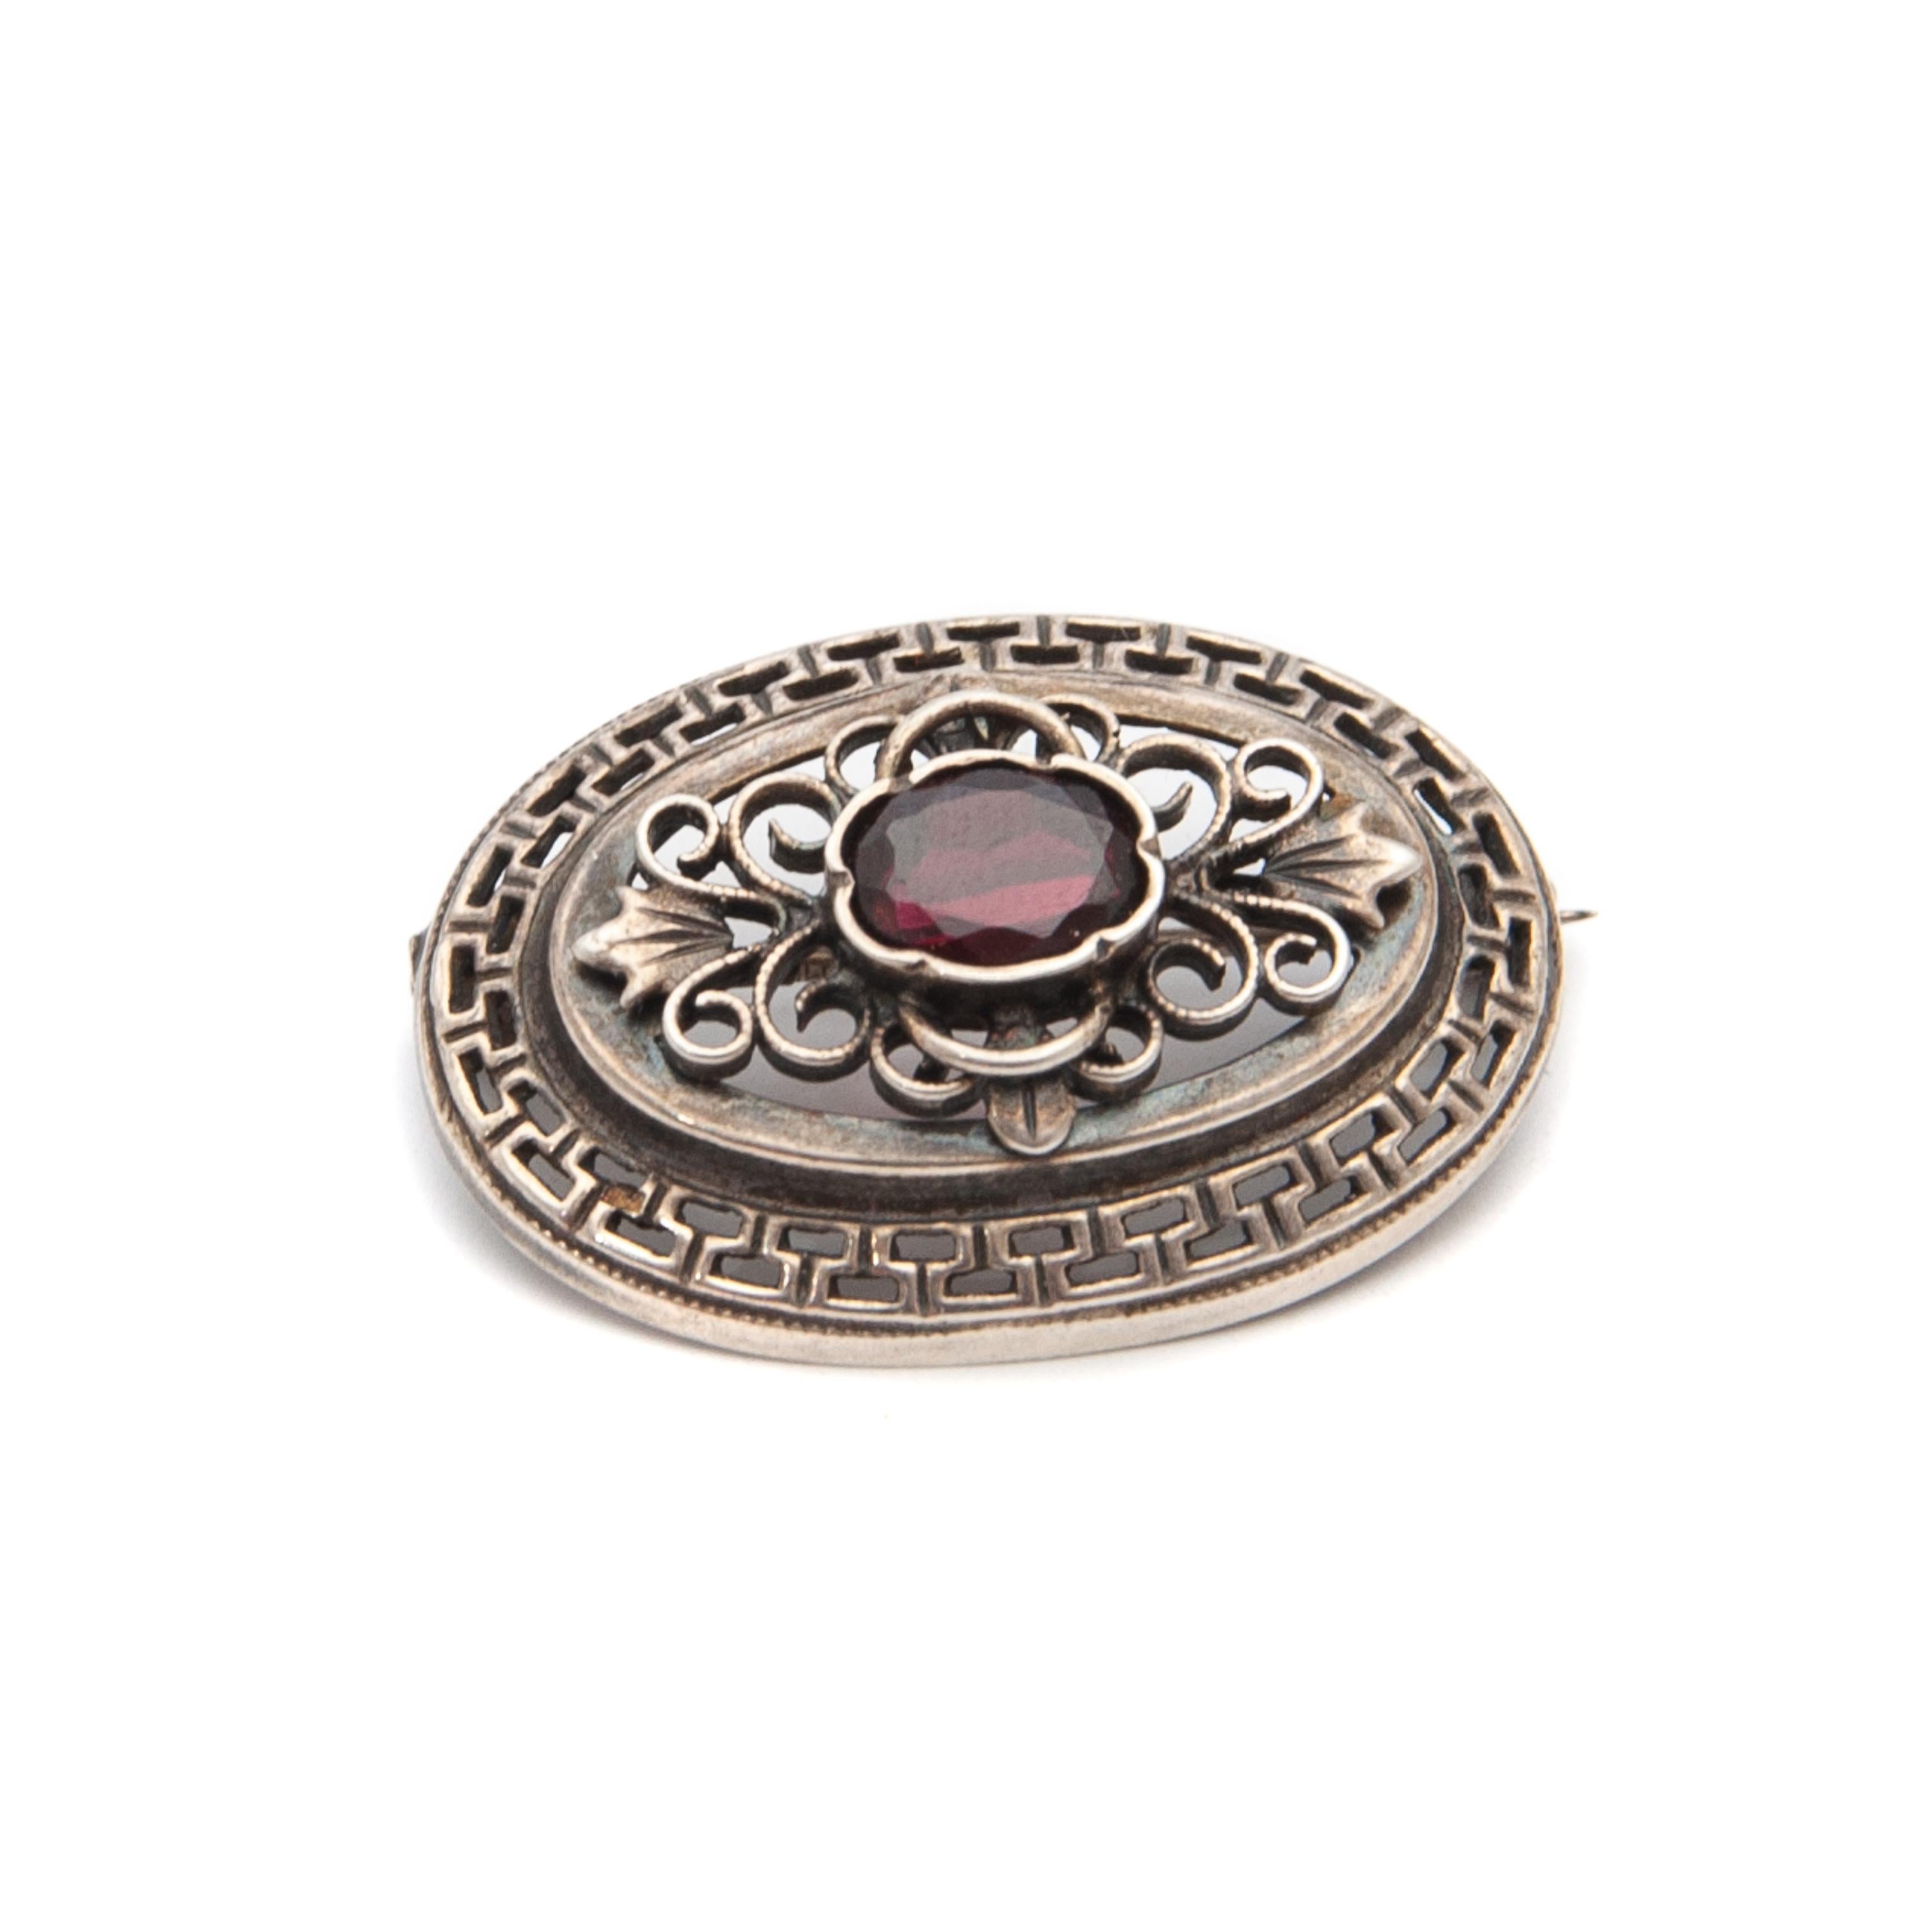 This lovely mid-century openwork oval-shaped brooch is set with a faceted garnet in the middle. The silver has an openwork floral structure with swirling motifs, while the border has a repeating old Greek design. Which makes this romantic brooch